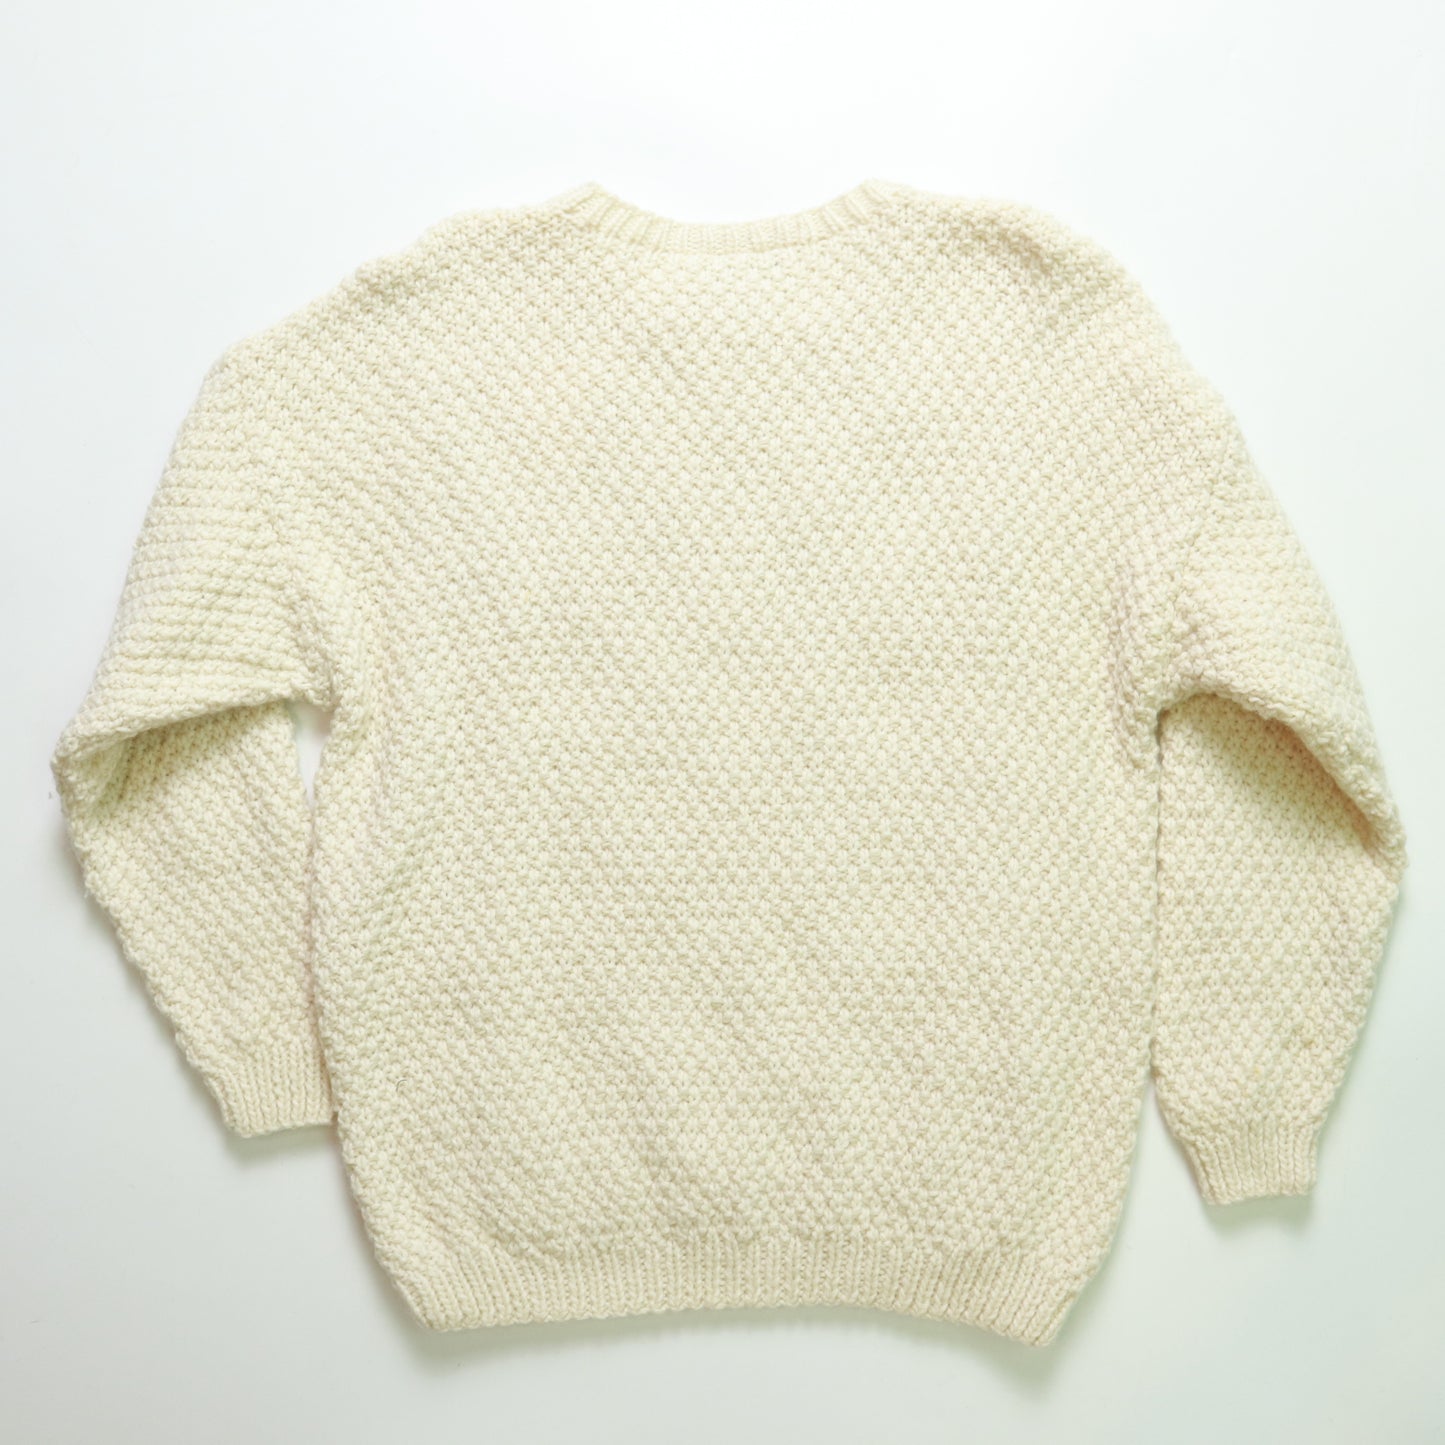 Three-dimensional knitted fisherman sweater wool sweater vintage sweater